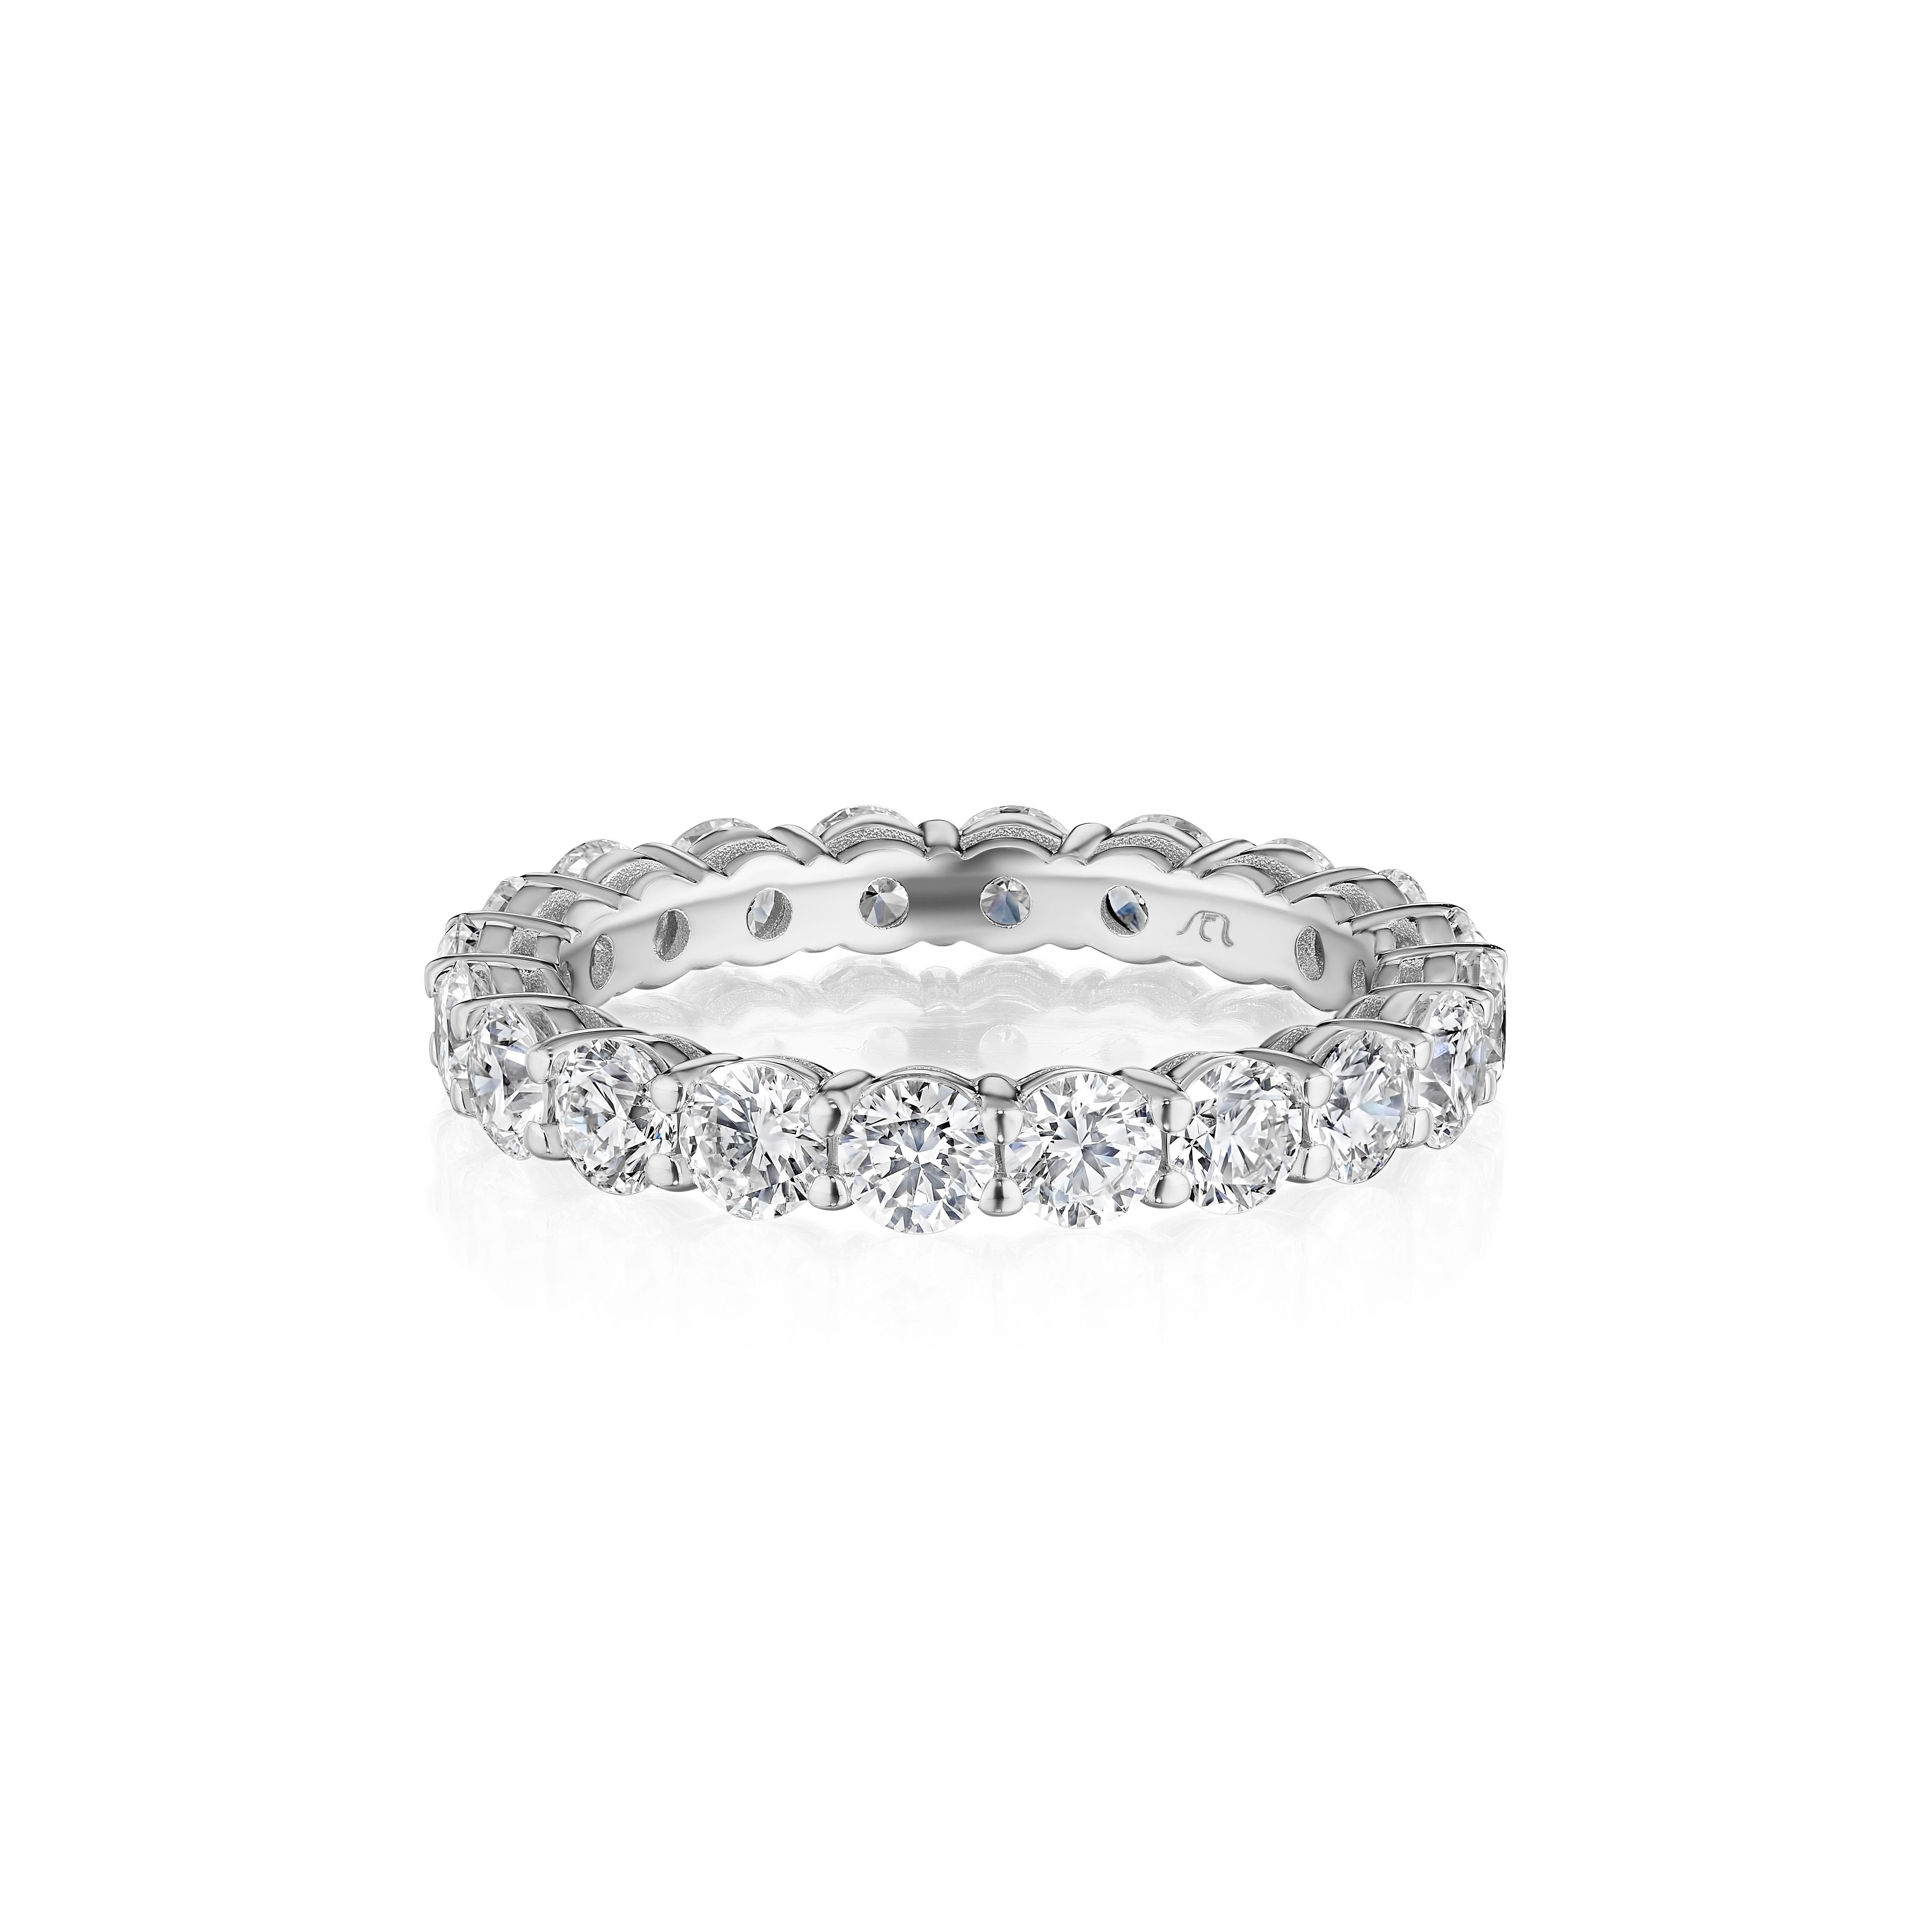 • Crafted in 18KT gold, this eternity band is made with 20 round brilliant cut diamonds which encircle the finger, and has a combining total weight of approximately 2.50 carats. The diamonds are set into a shared prong setting. Worn beautifully on